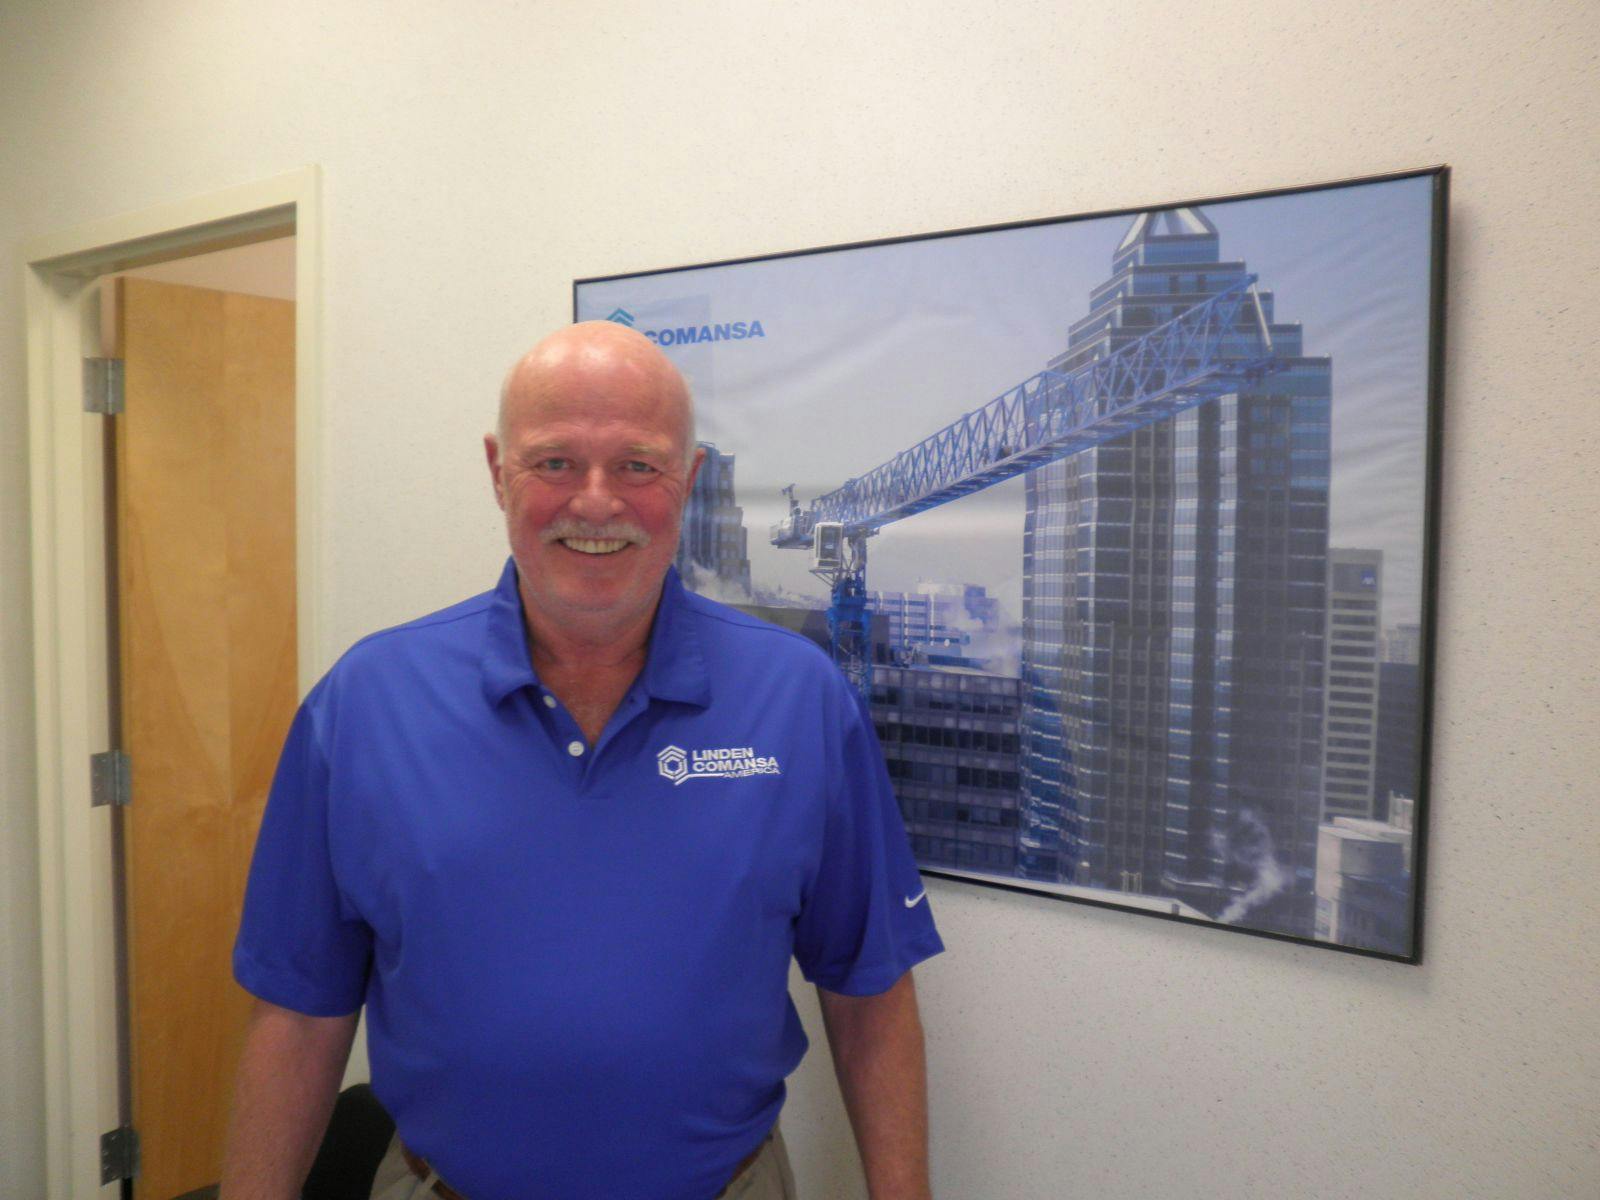 Linden Comansa America Adds Tower Crane Project Specialist to Team